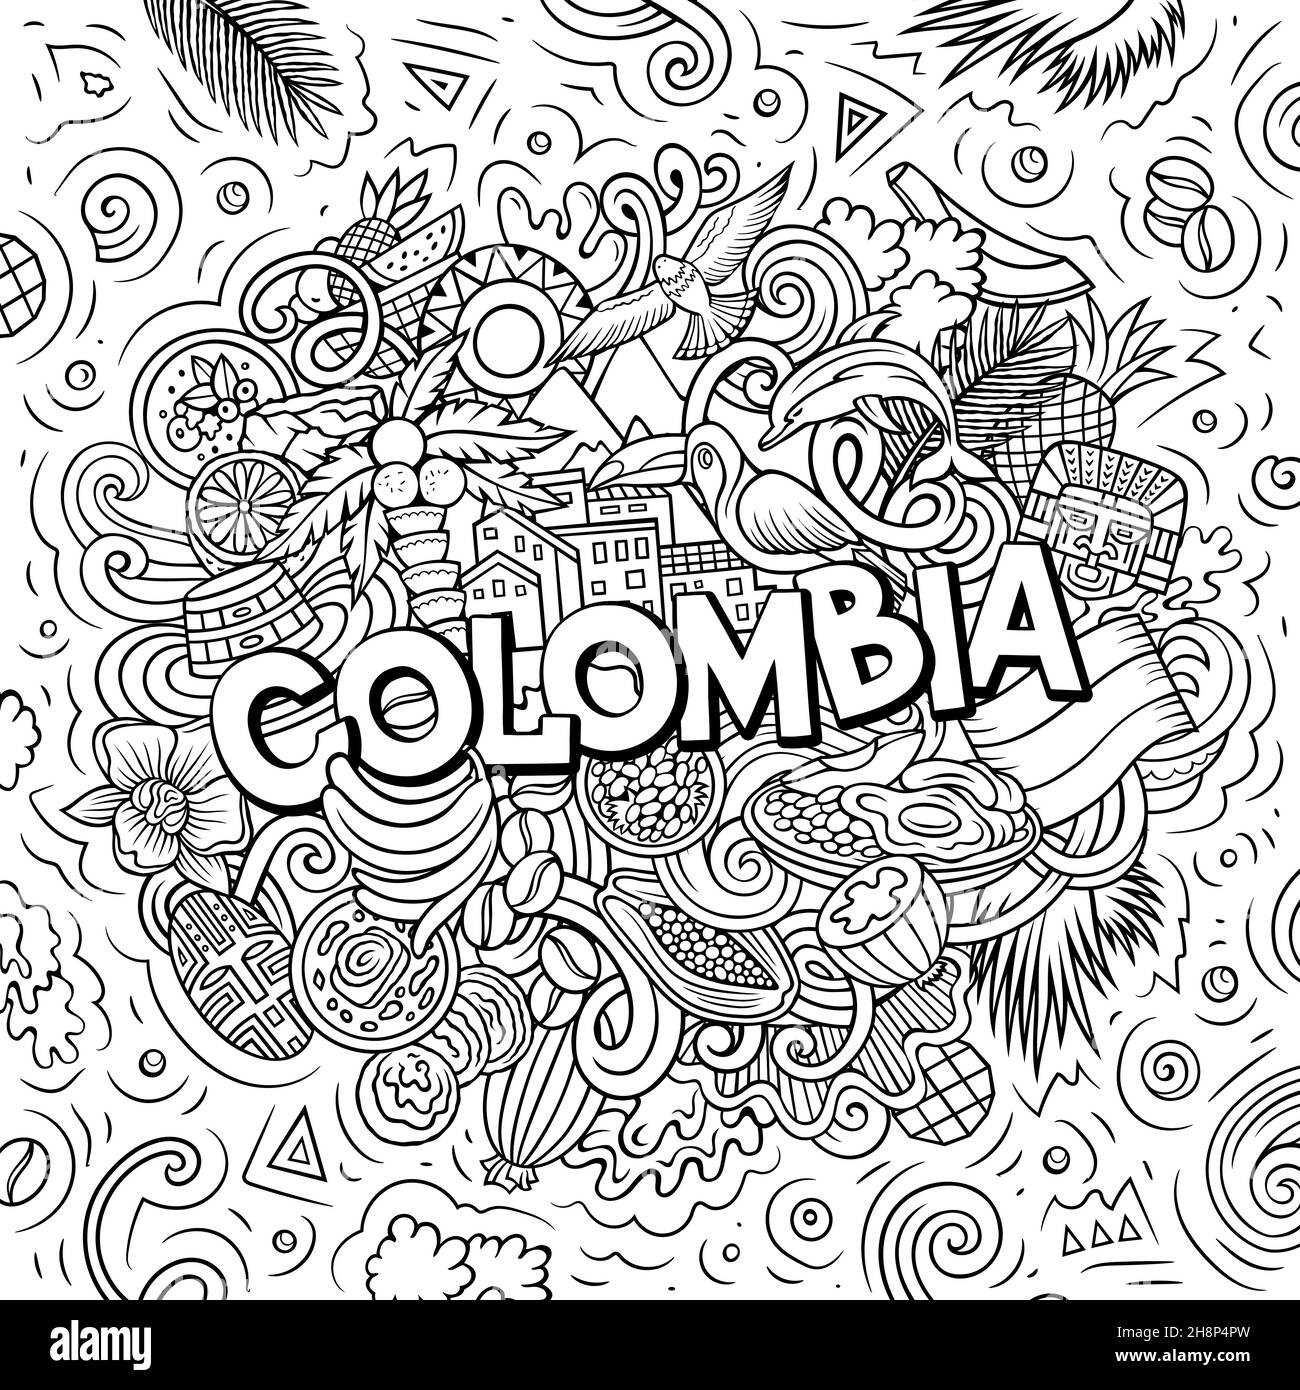 Colombia hand drawn cartoon doodle illustration funny colombian design creative vector background handwritten text with latin american elements and stock vector image art